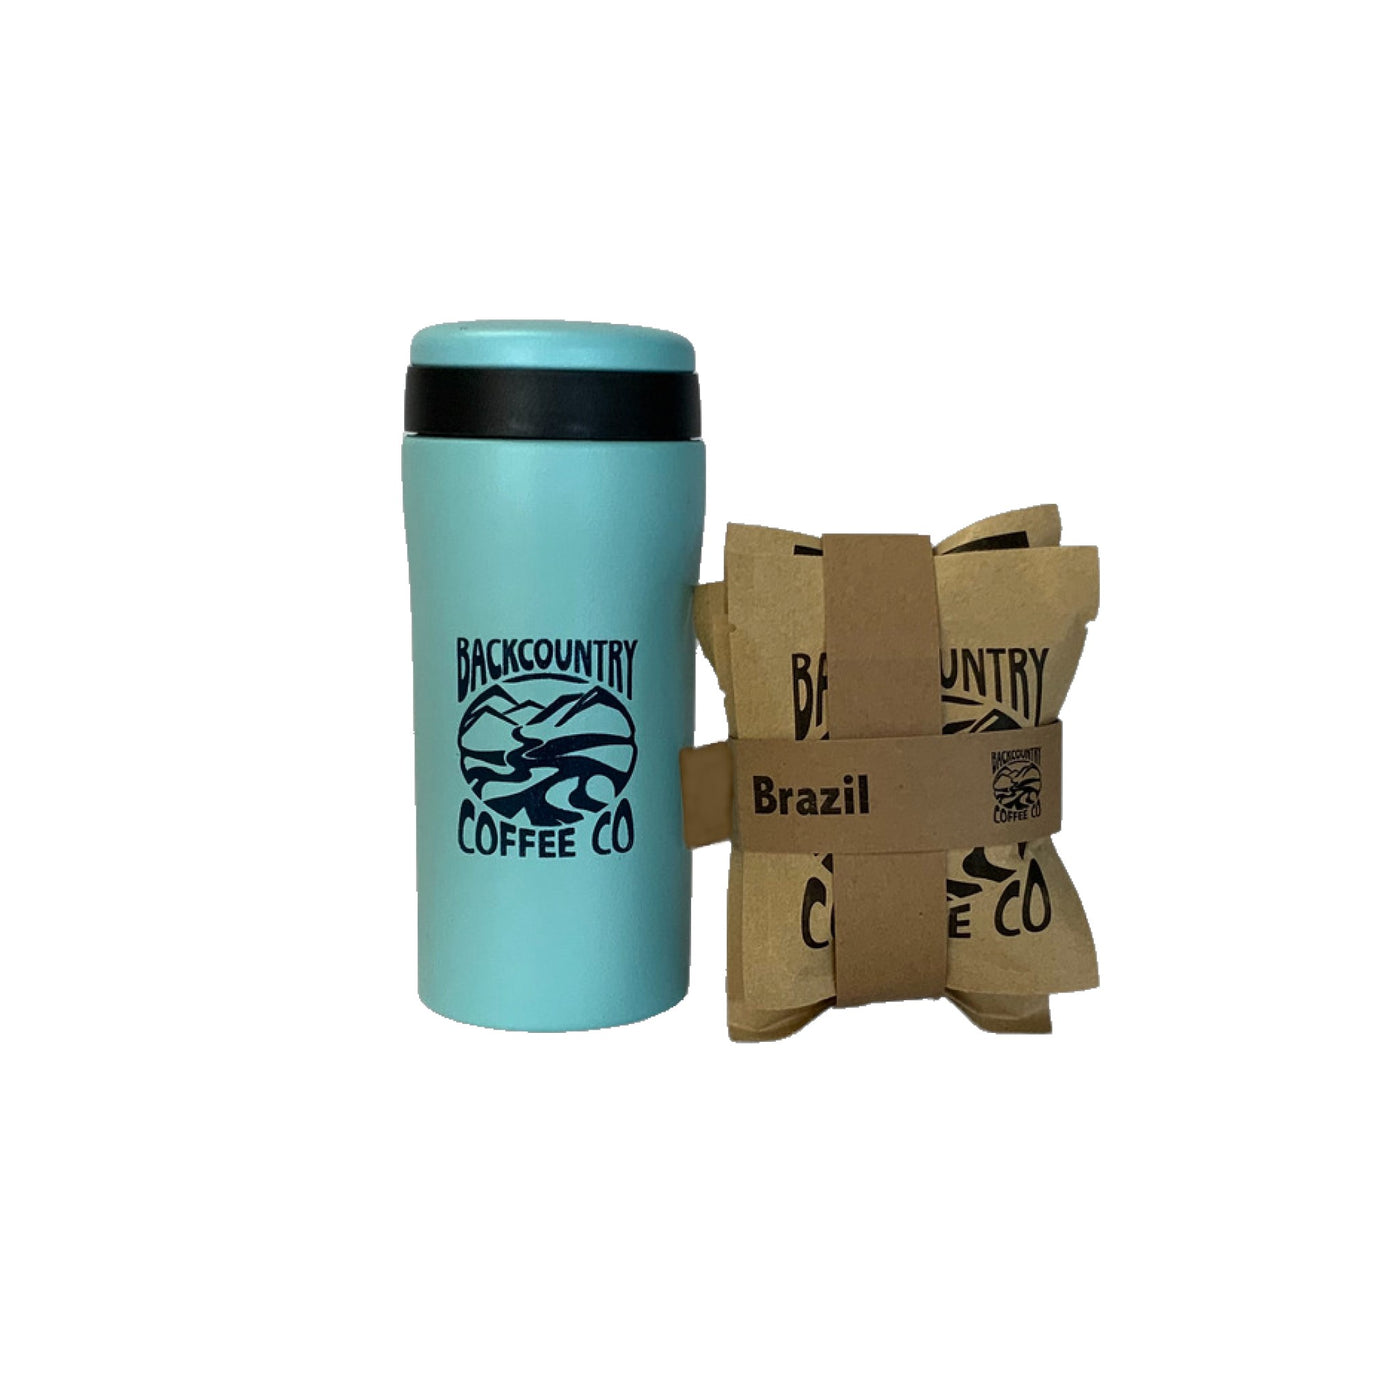 Backcountry Coffee and Cup Combo | Camp Kitchen NZ | Further Faster Christchurch NZ #aqua